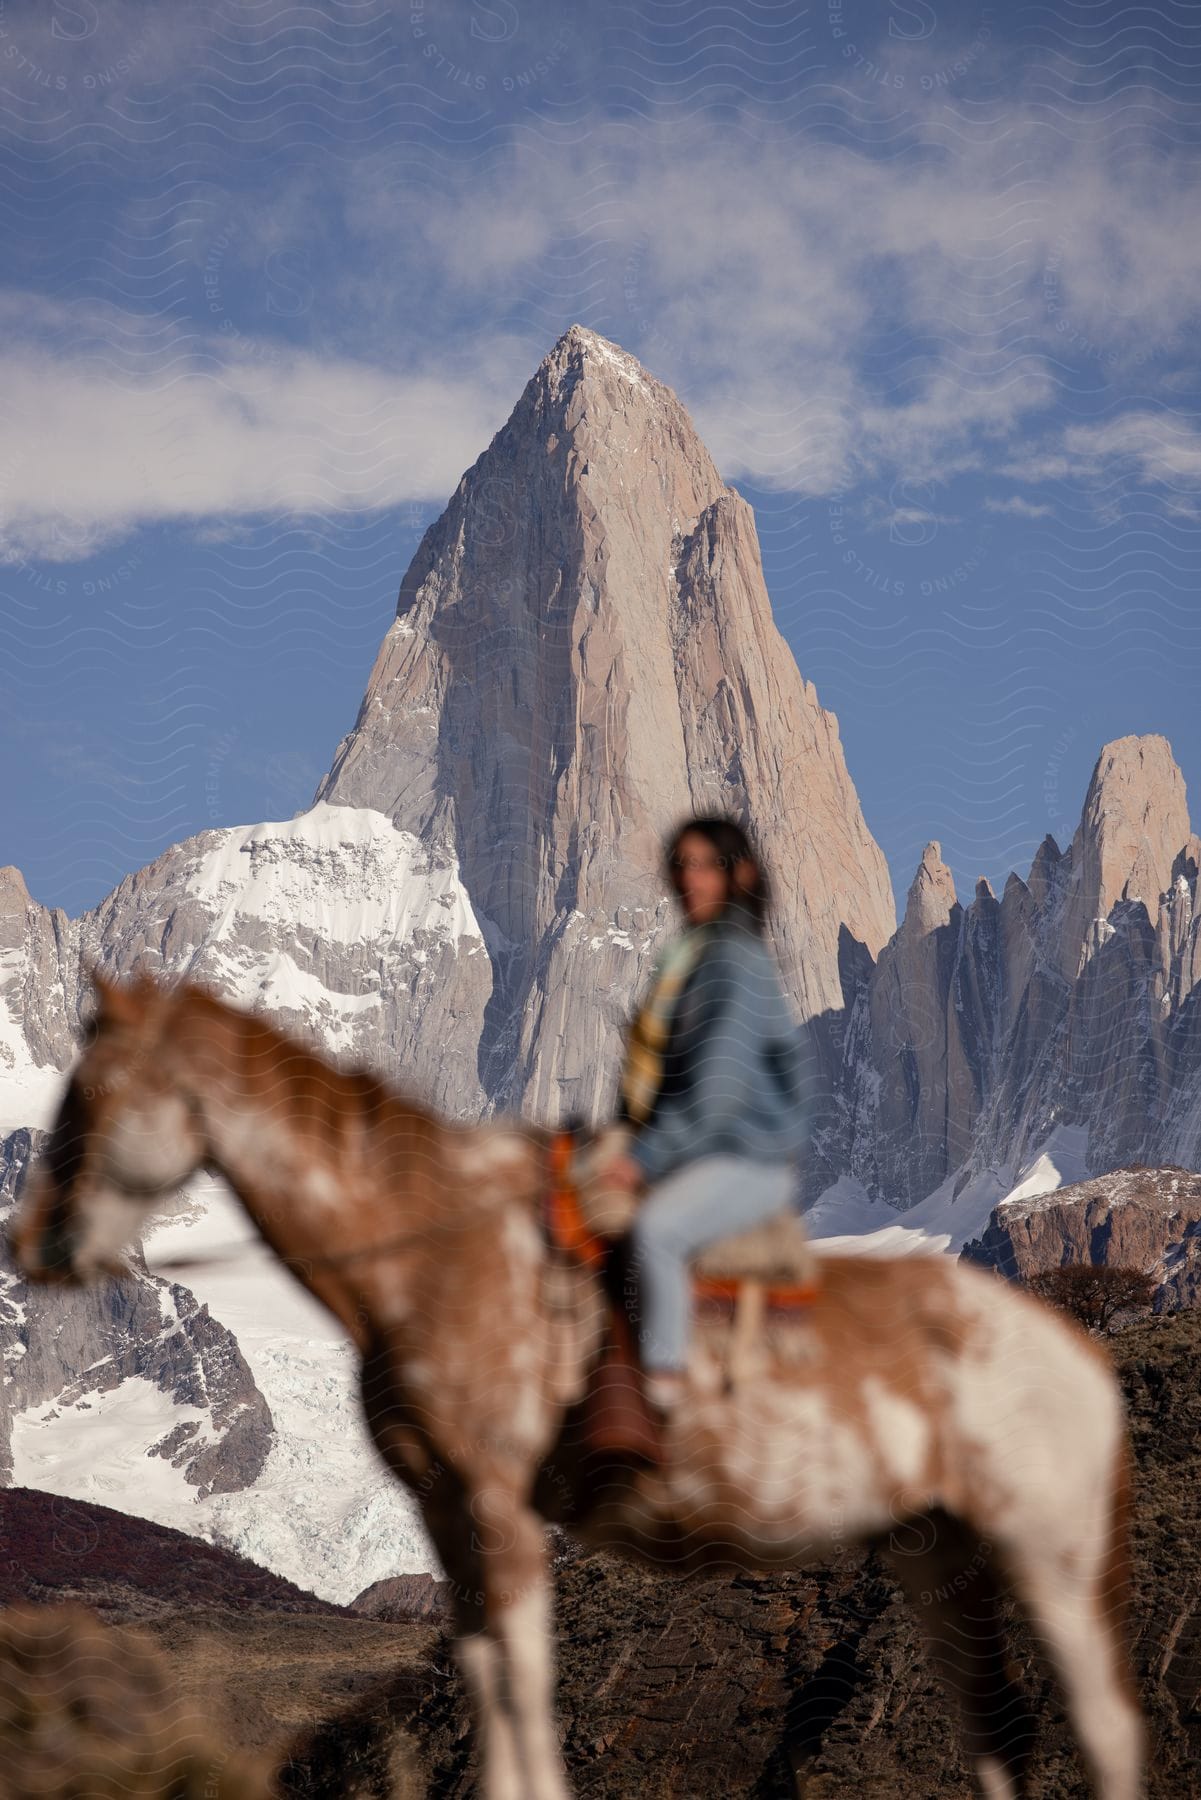 Woman on horseback out of focus, with a sharp mountain peak in the background under a blue sky.